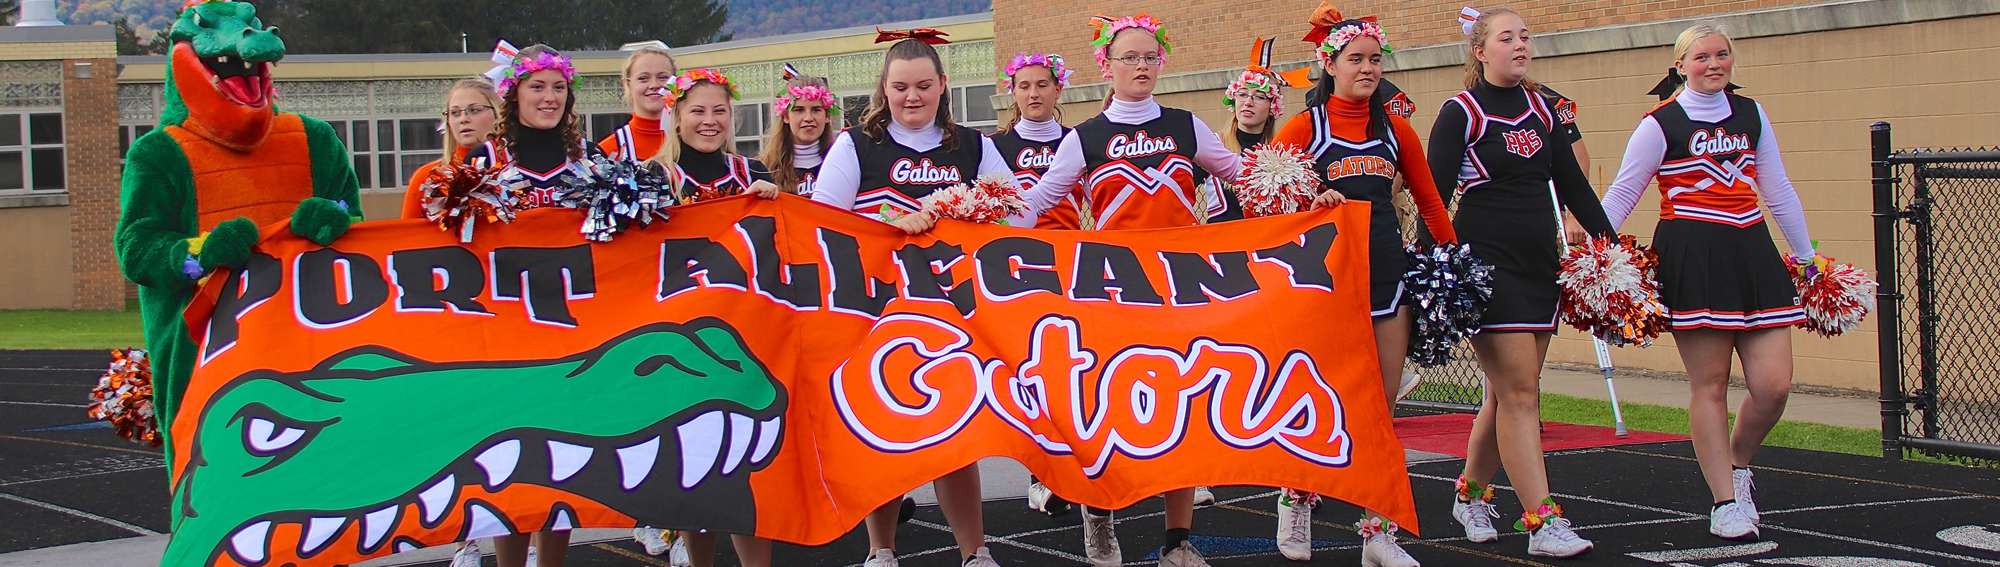 gator mascot and cheerleaders hold a banner that says Port Allegany Gators